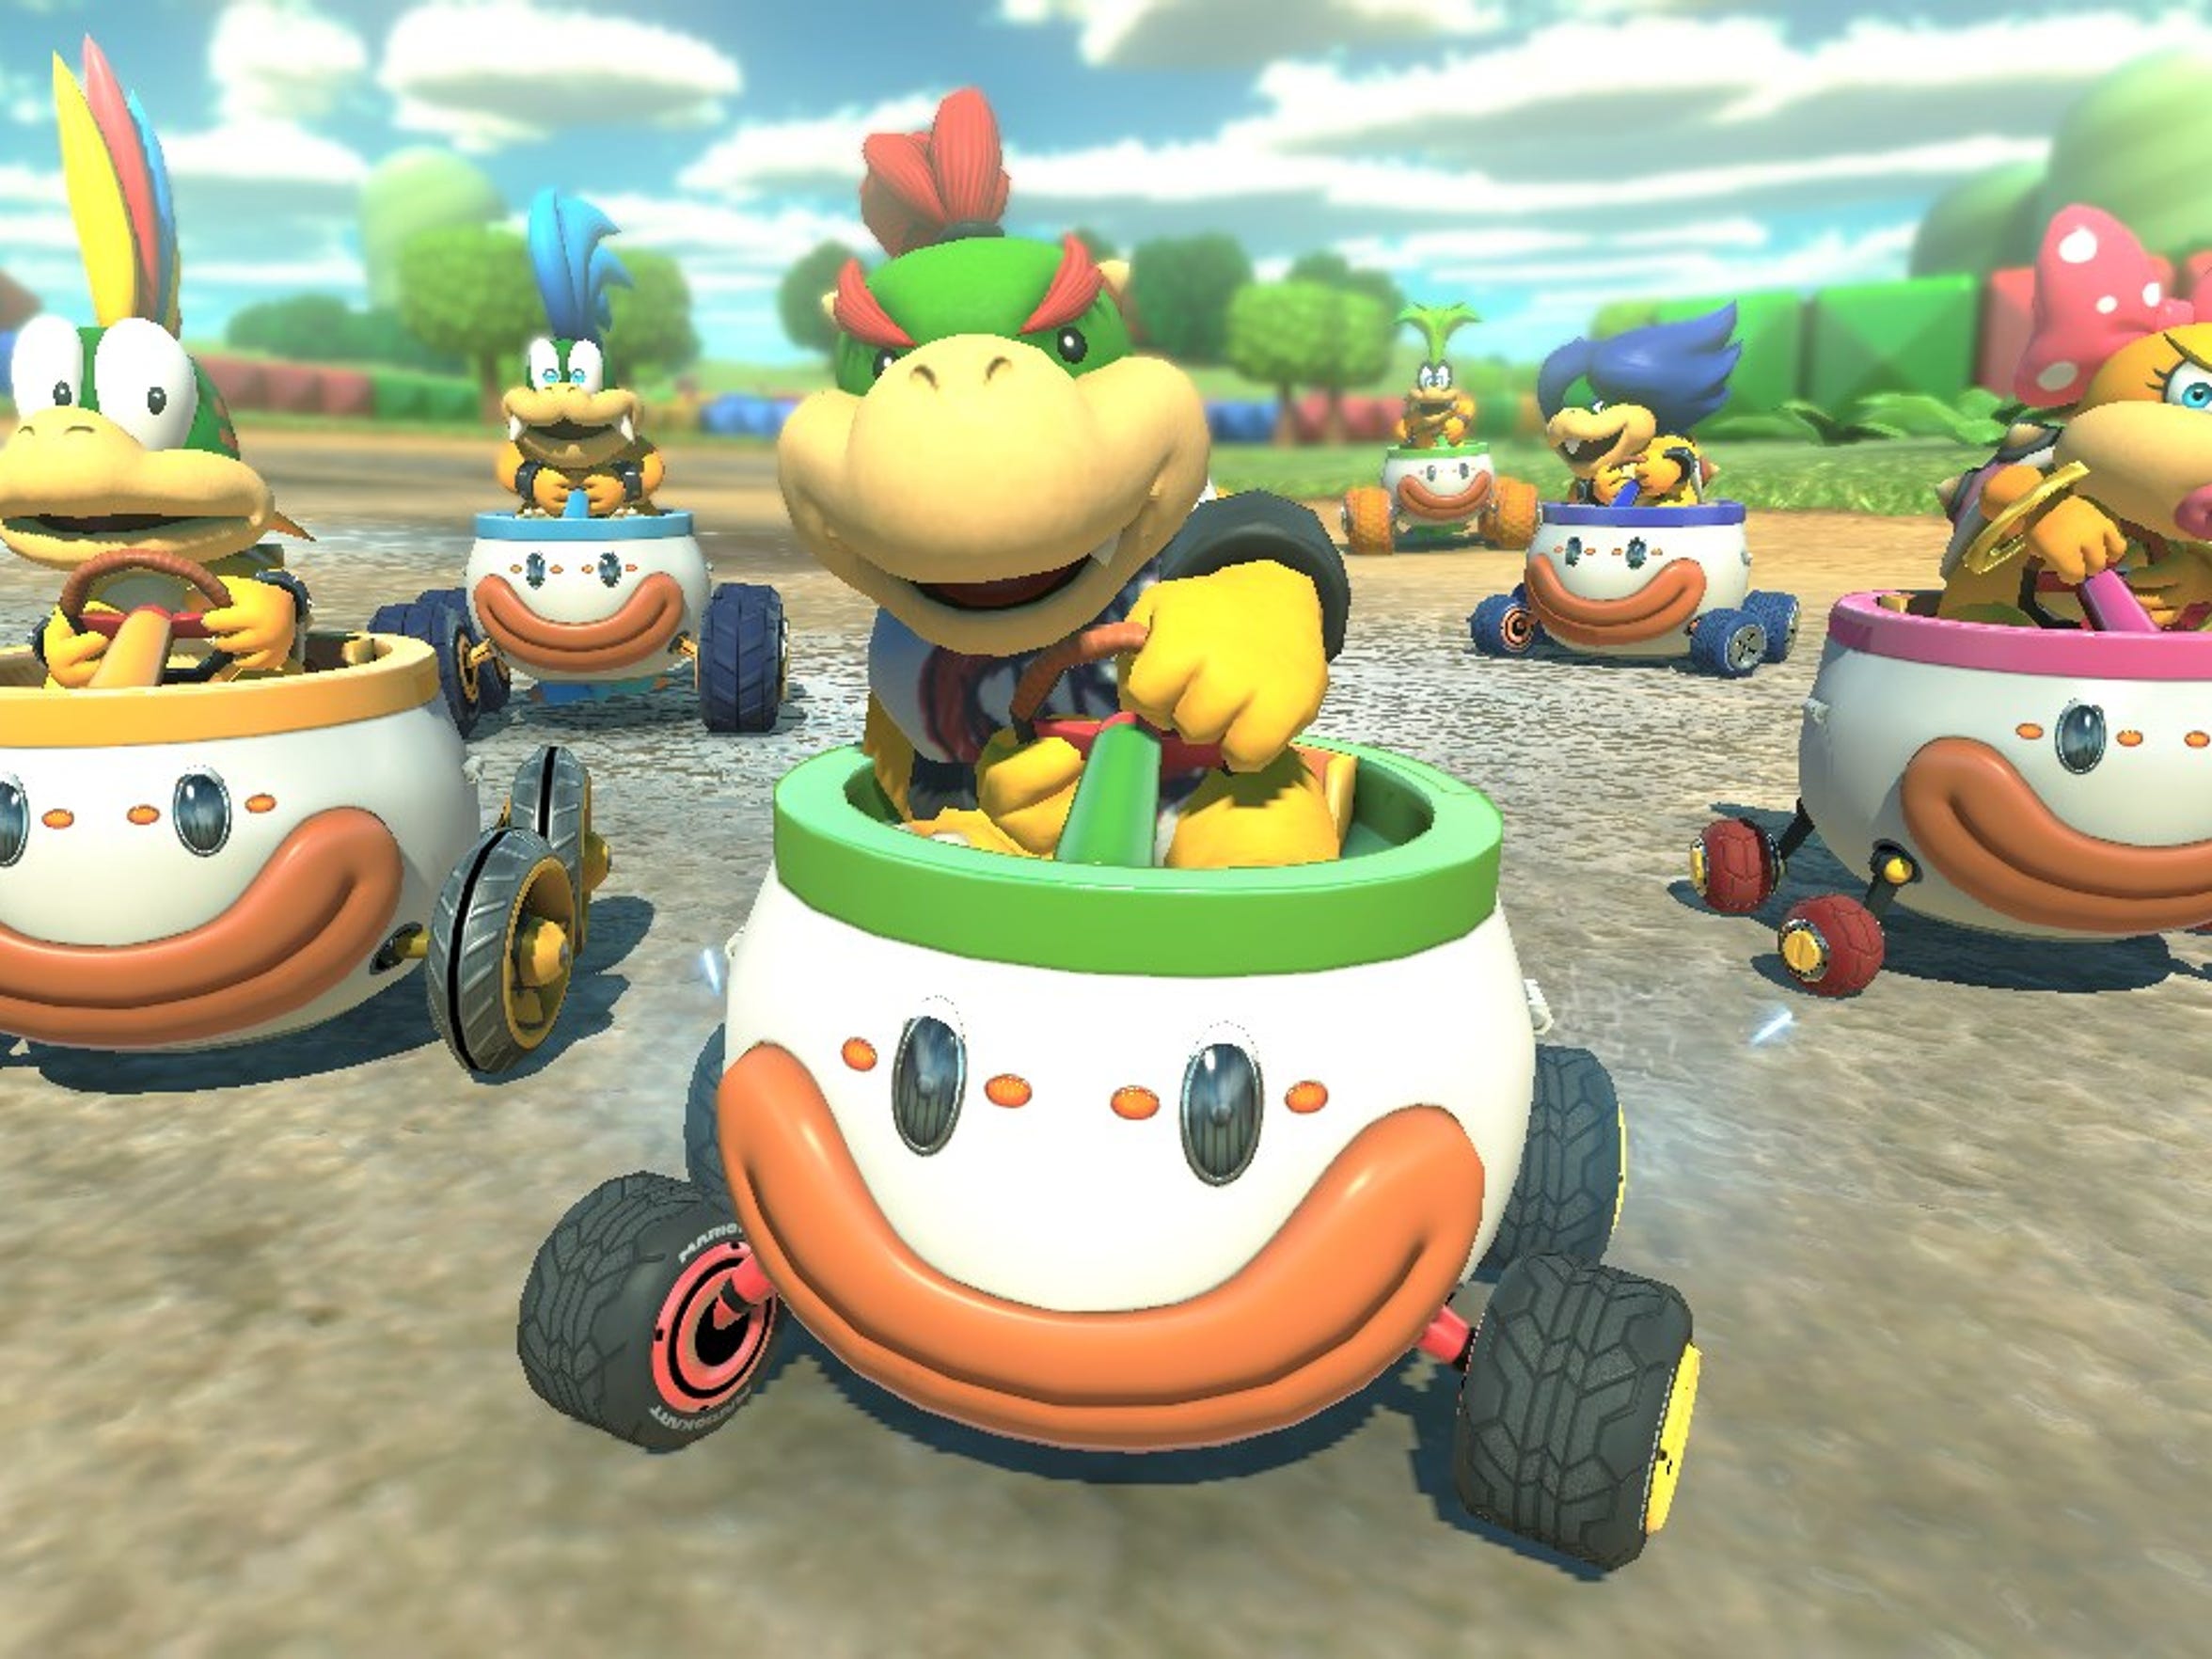 Switching Gears Mario Kart 8 Deluxe Review Technobubble 2484